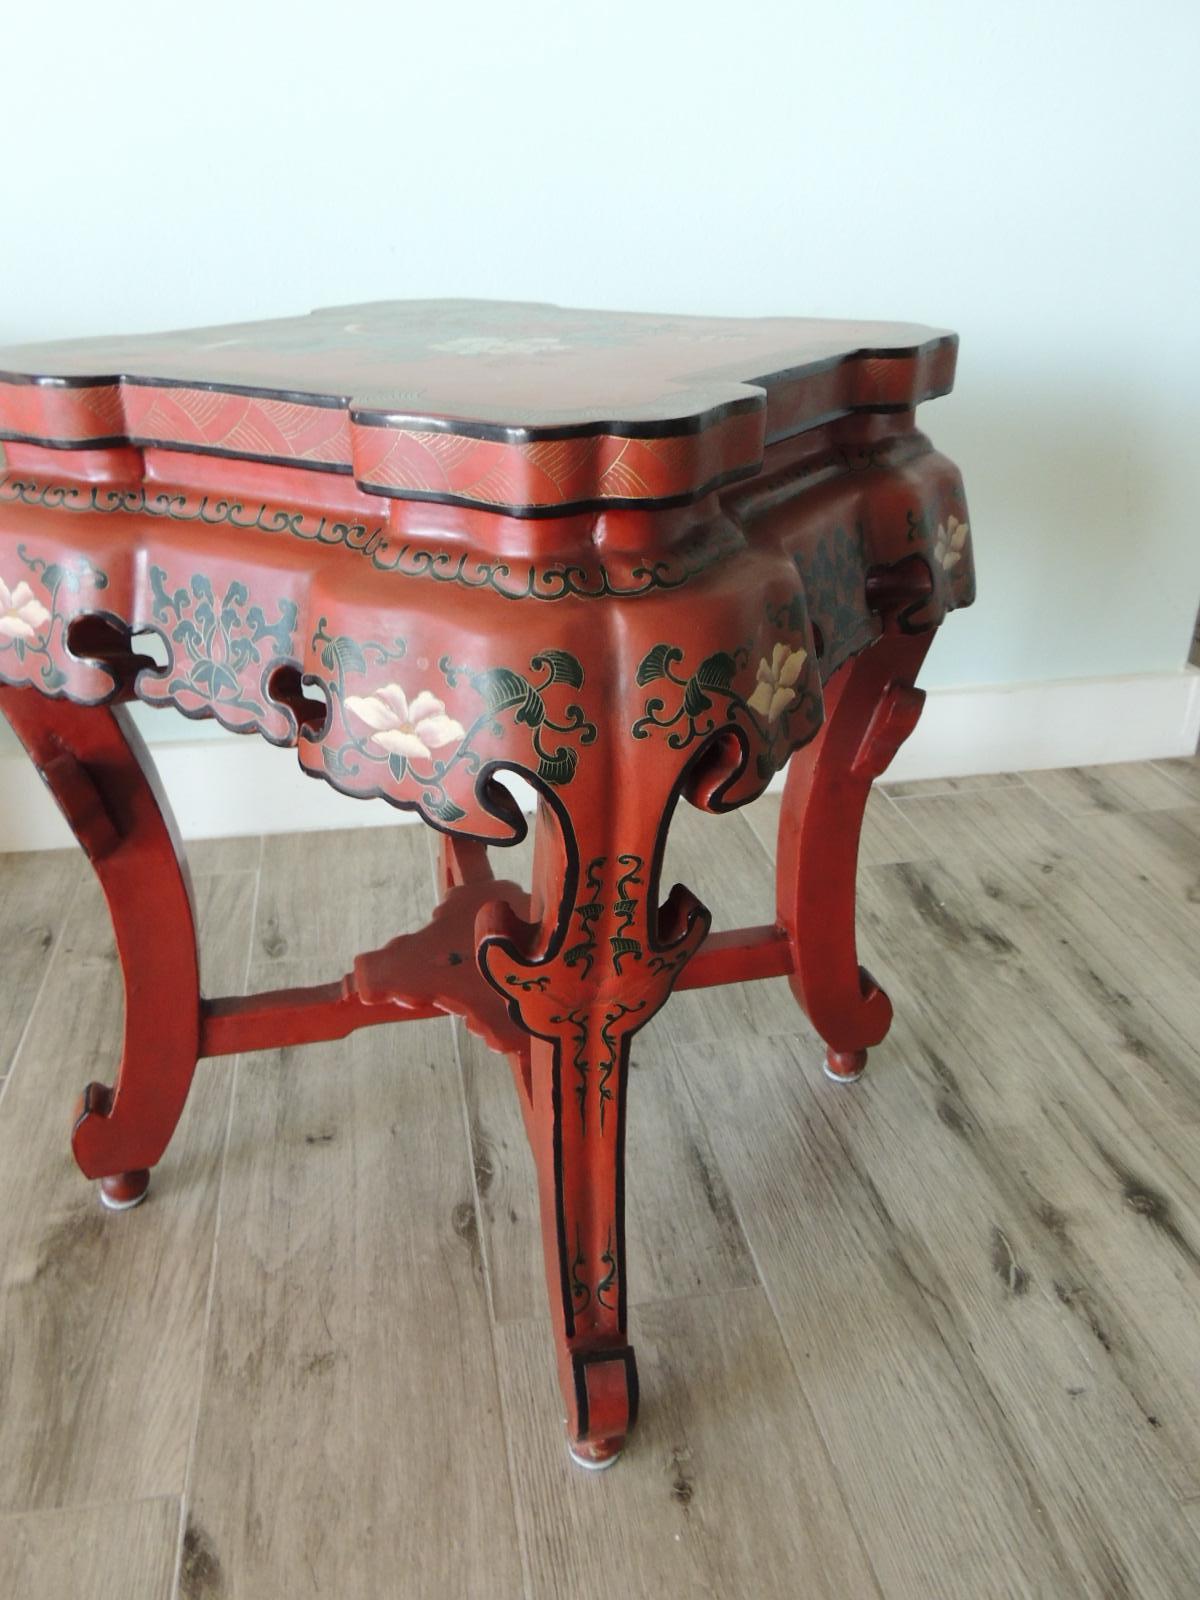 20th Century Vintage Red Lacquer Asian Side Table or Stool